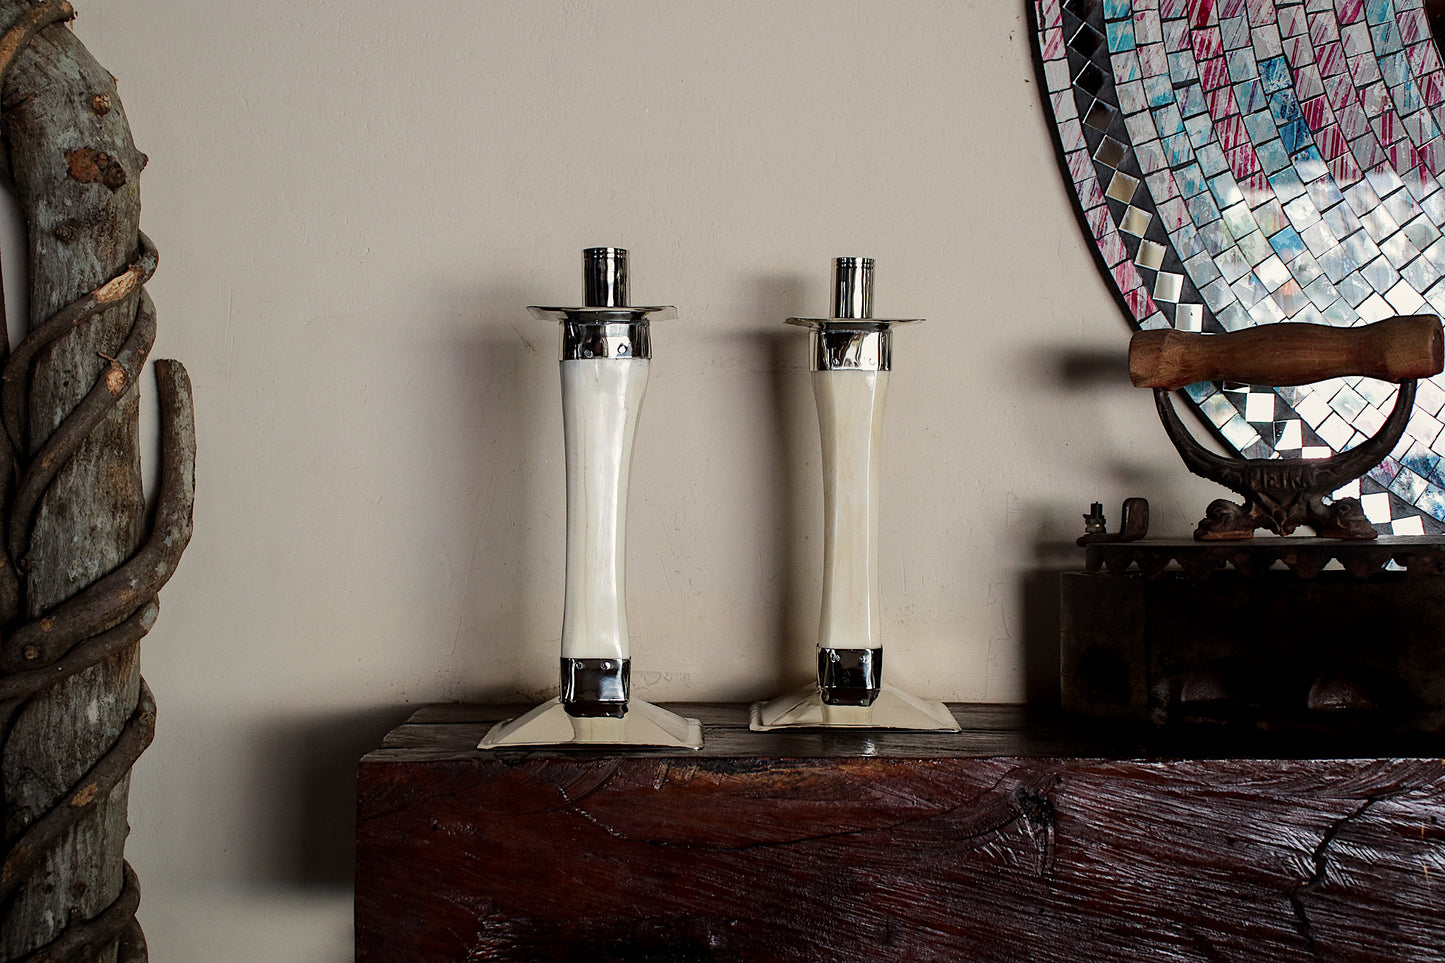 Antler and Nickel Silver candlesticks